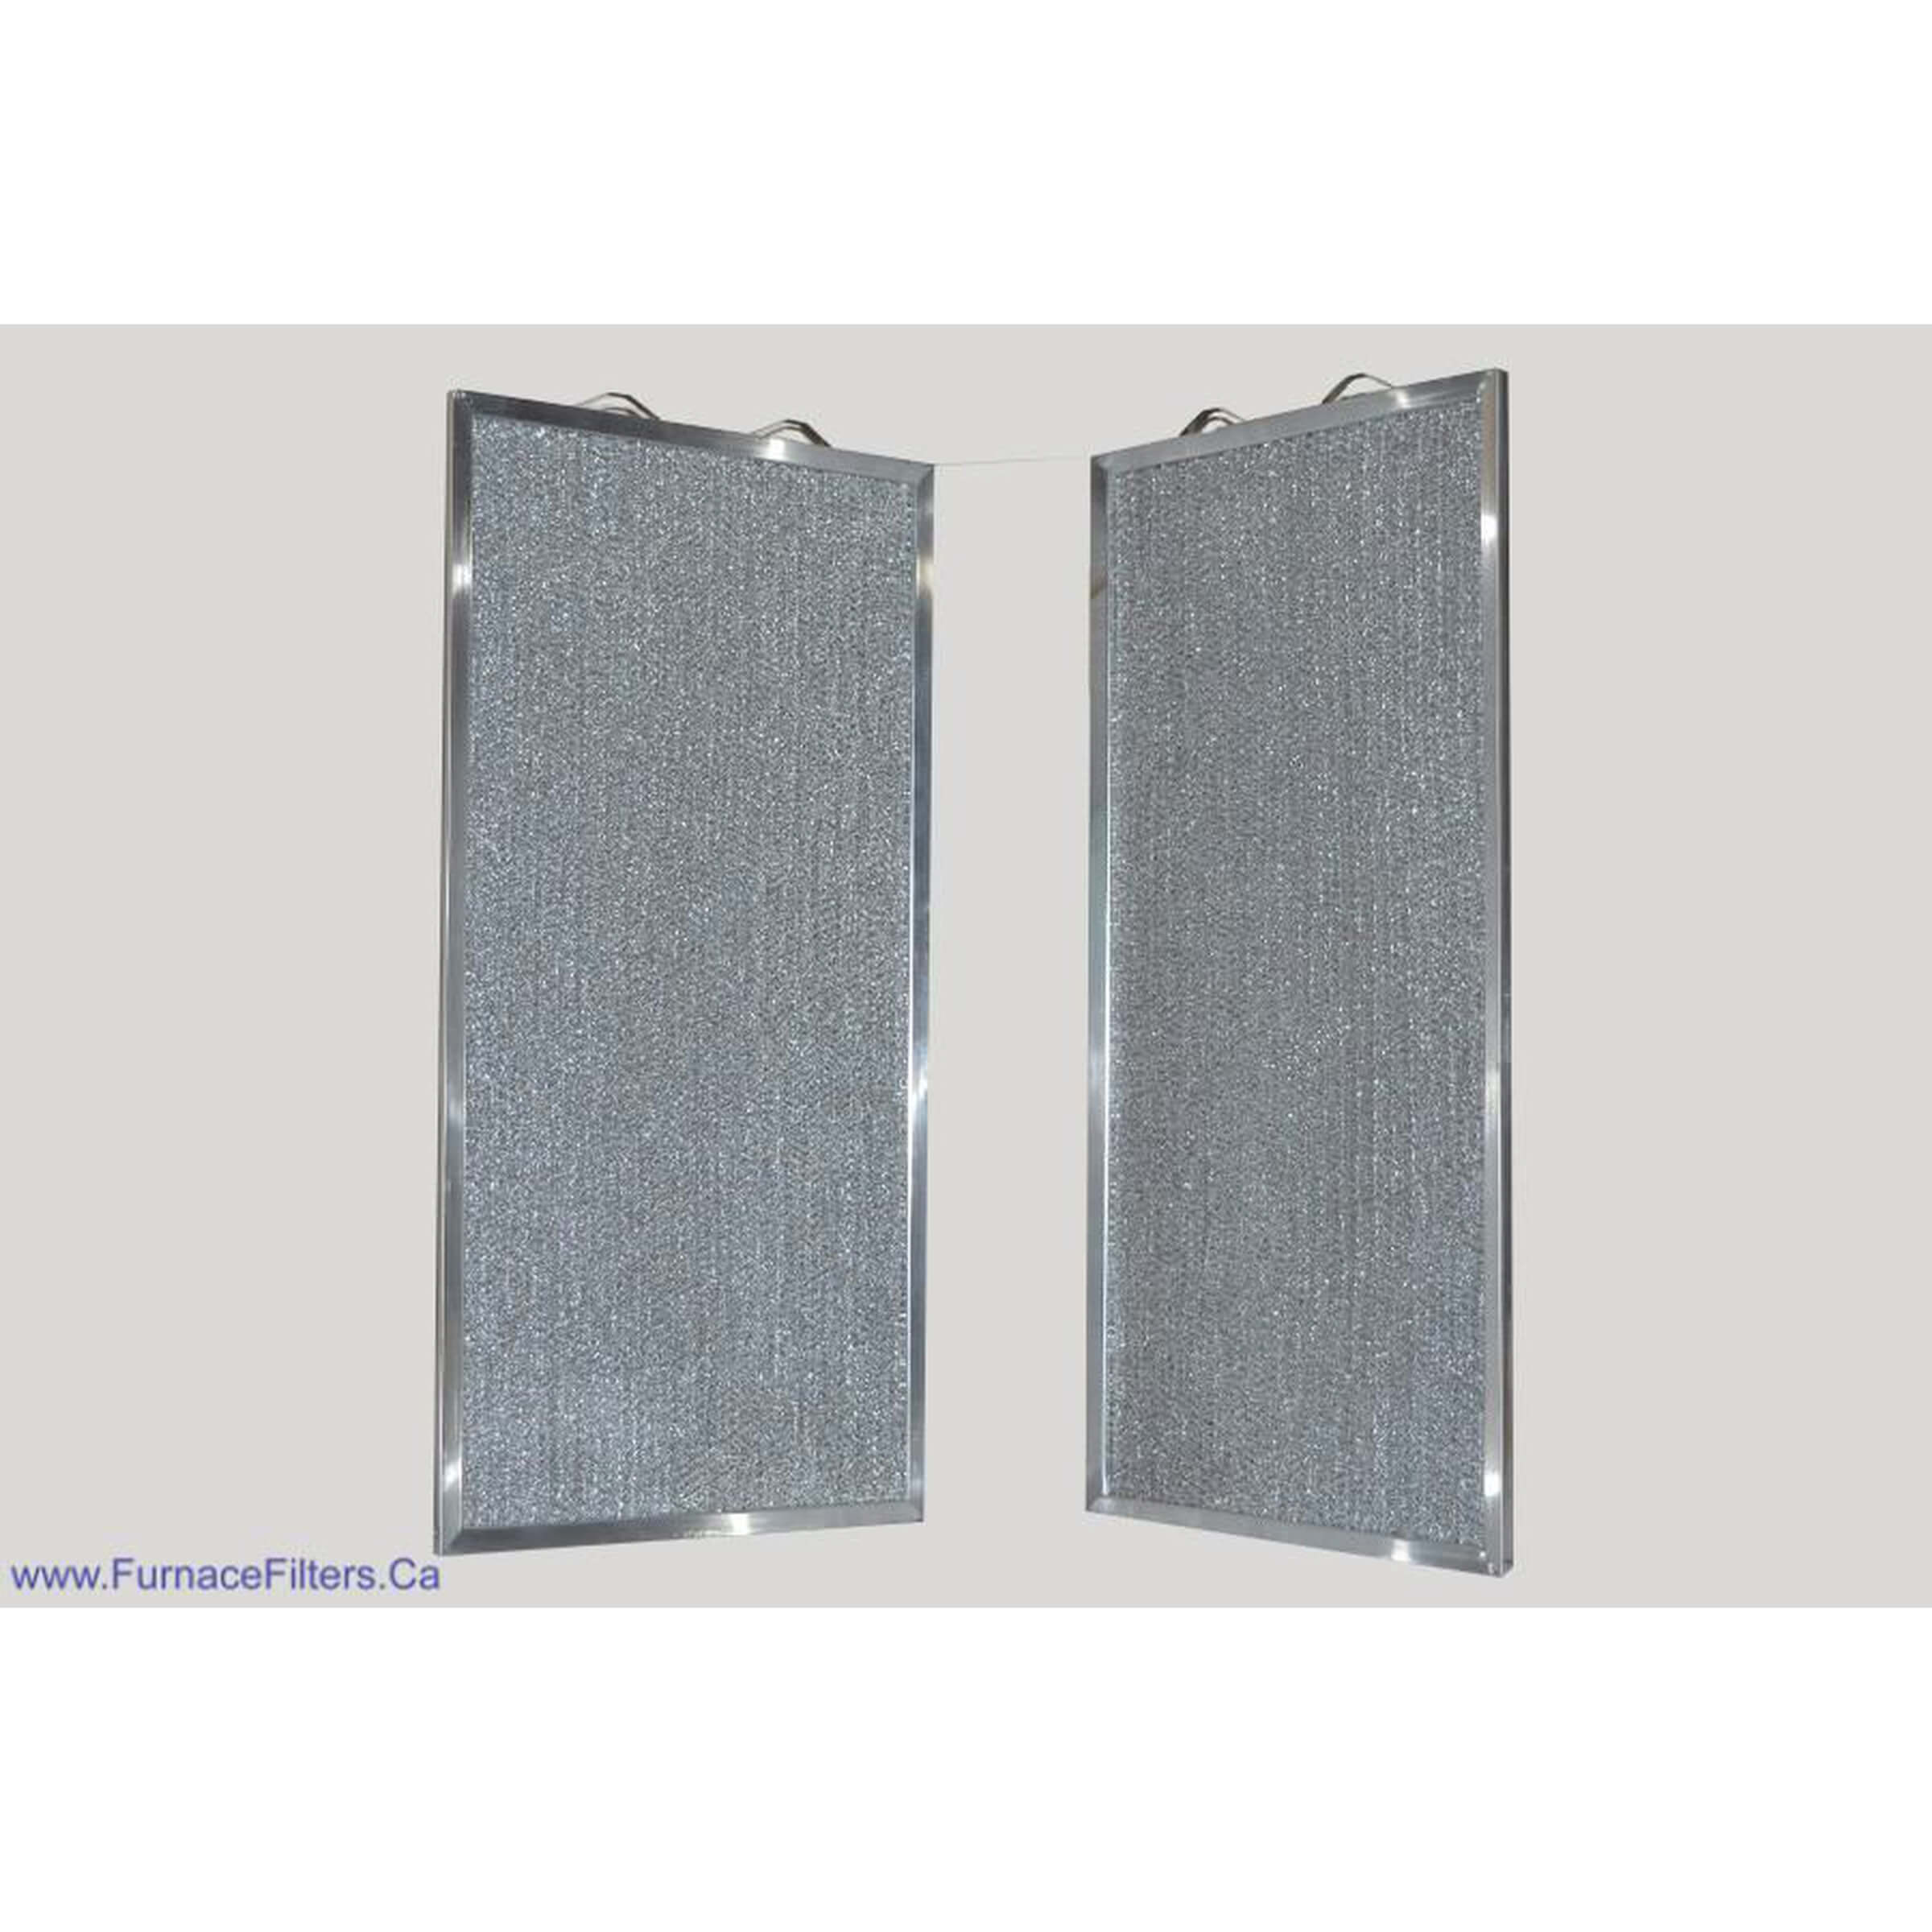 Honeywell Mesh Pre-Filter for 16x25 Electronic Air Cleaners. System Requires 2 Pcs. Package of 2